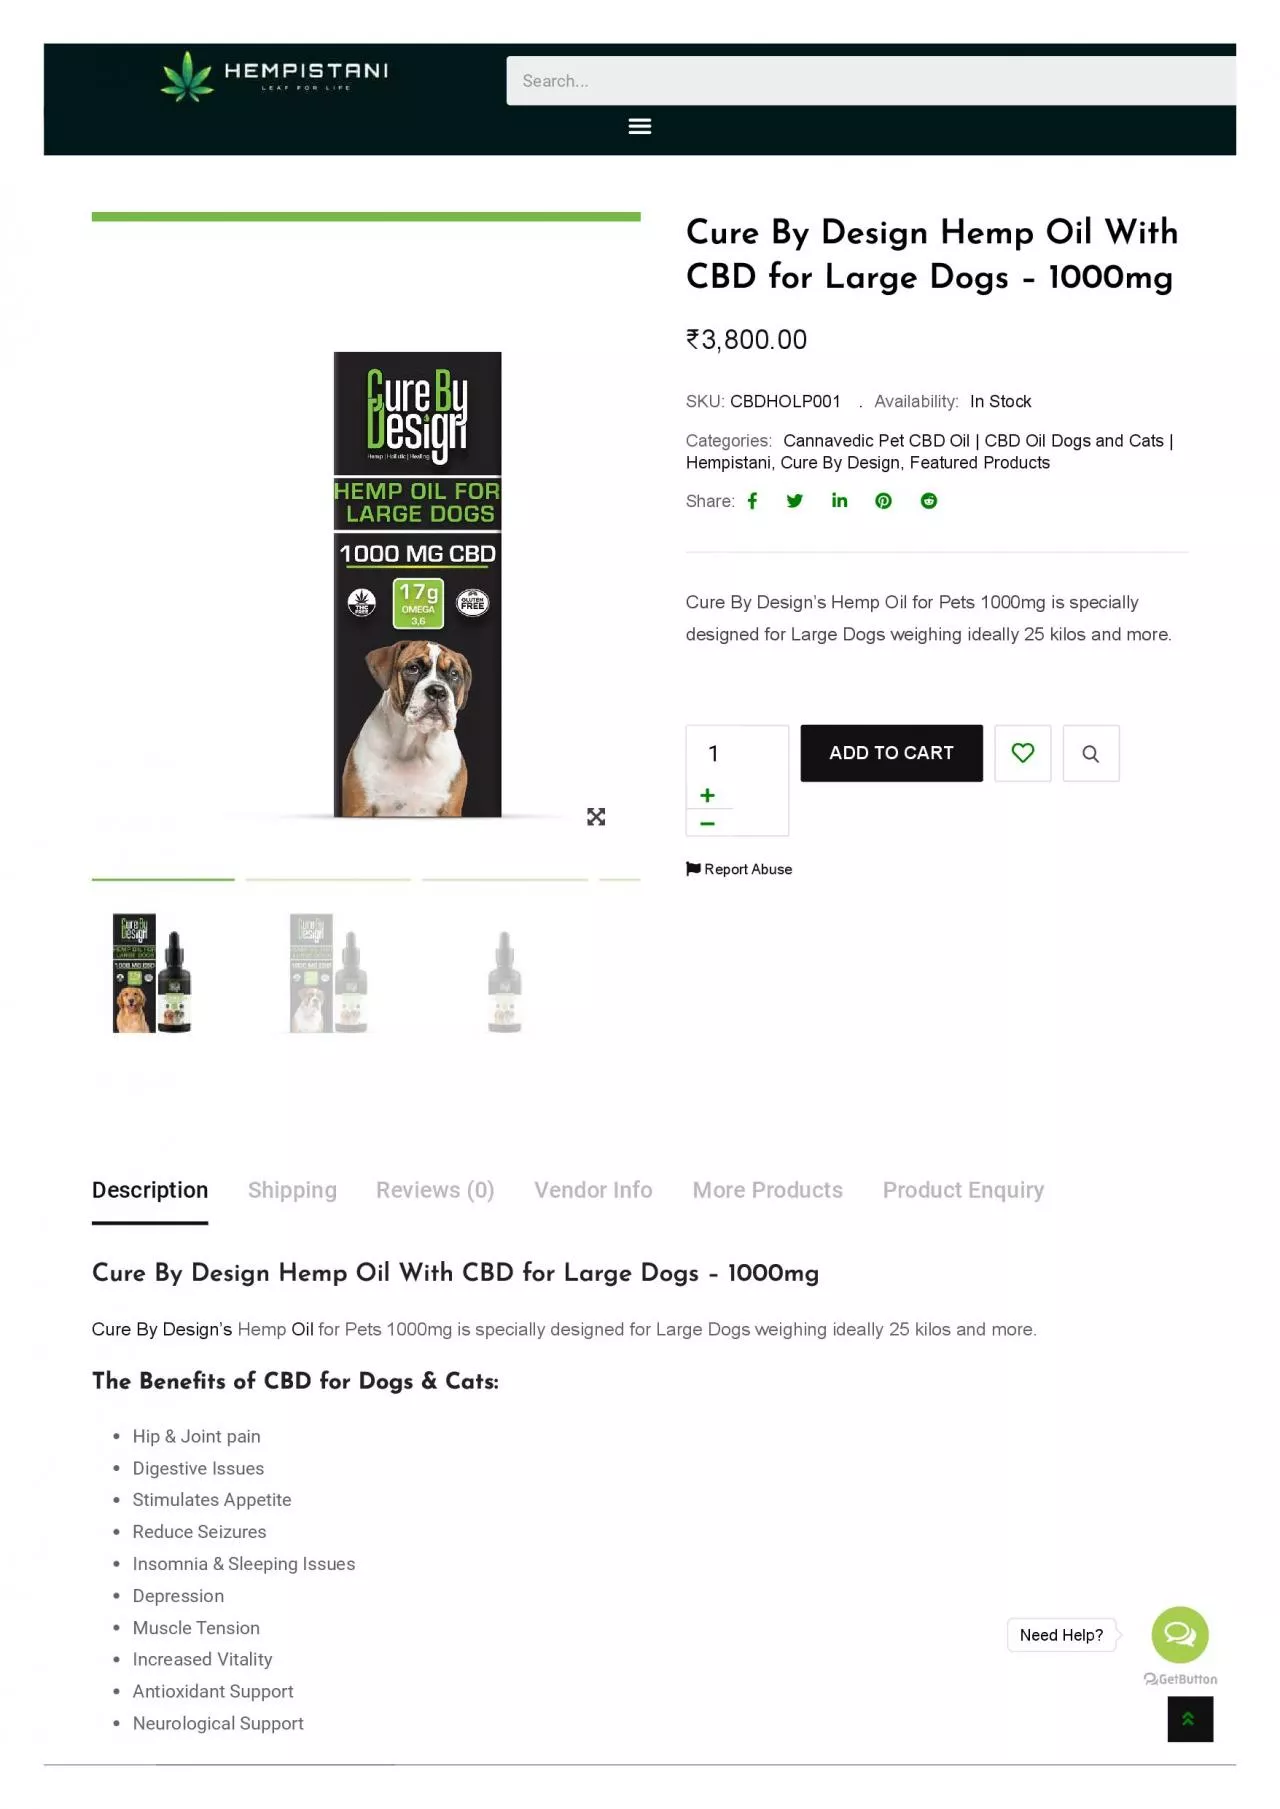 Cure By Design Hemp Oil With CBD for Large Dogs - 1000mg - Hempistani